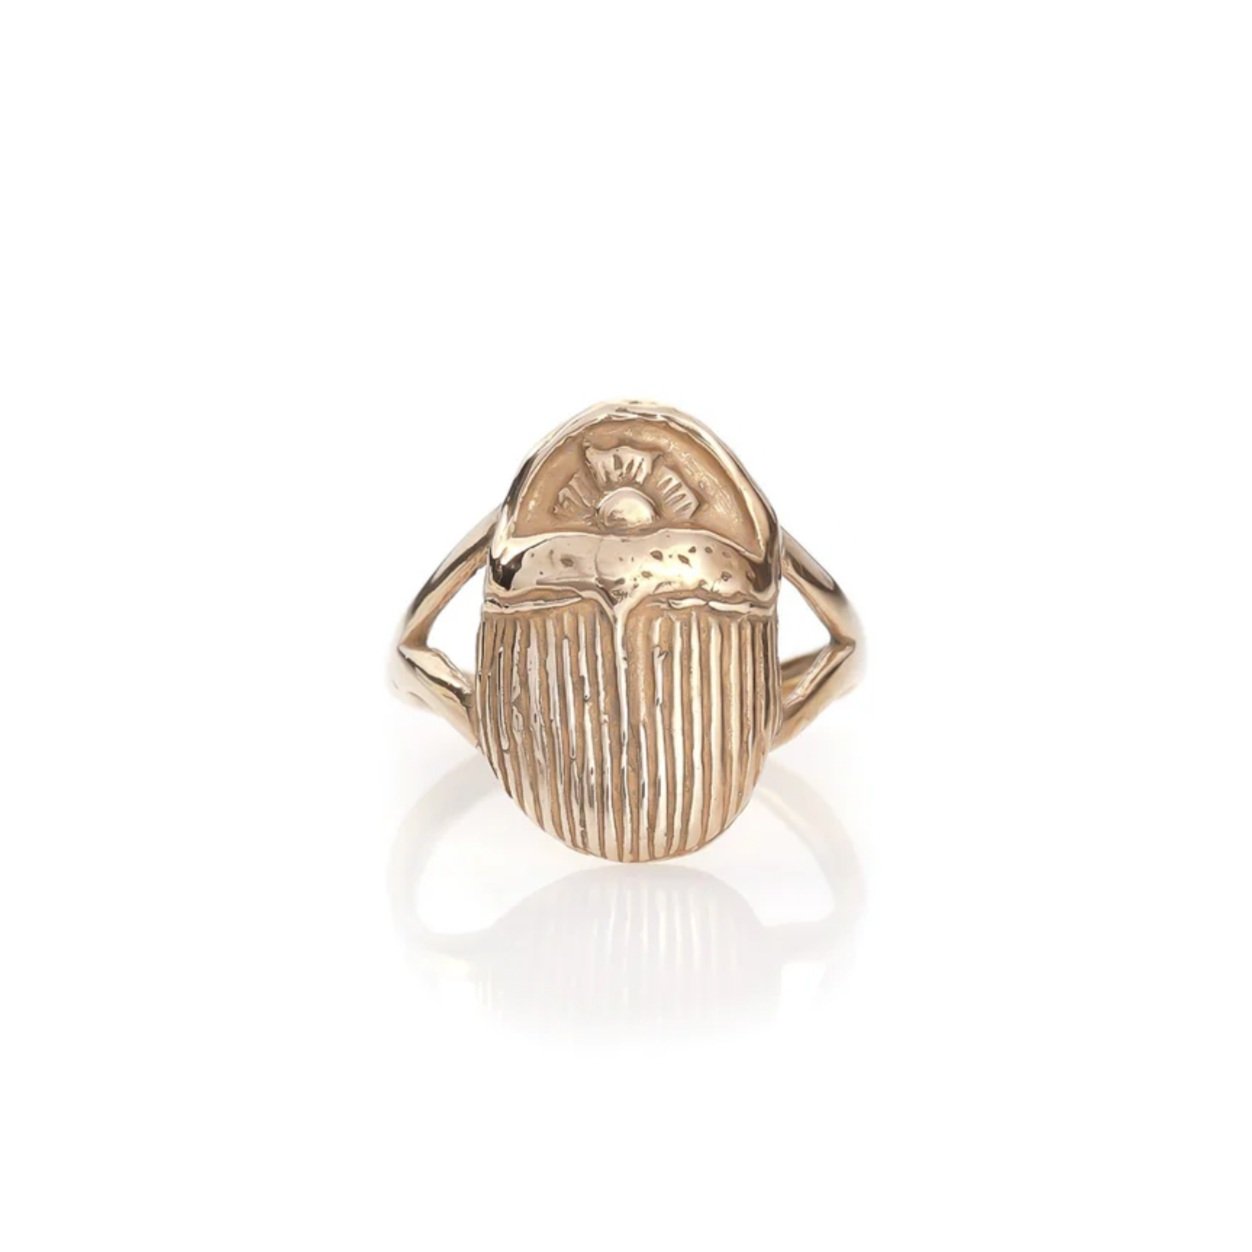 The Scarab Amulet Ring